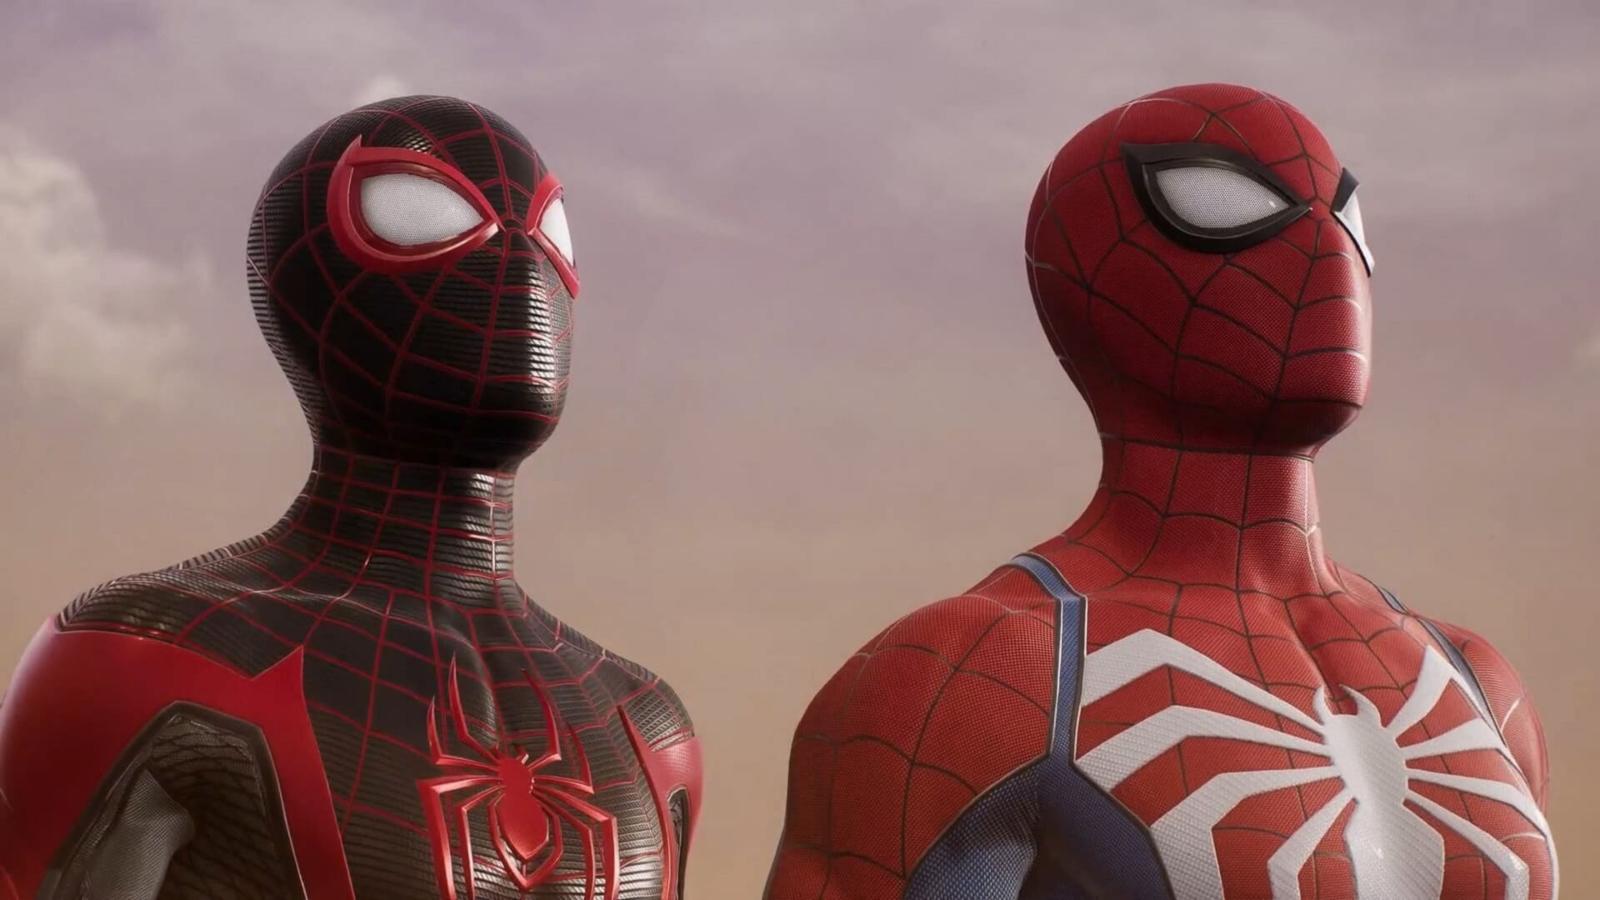 Marvel's Spider-Man 2 on PC: Possible Release Date and More